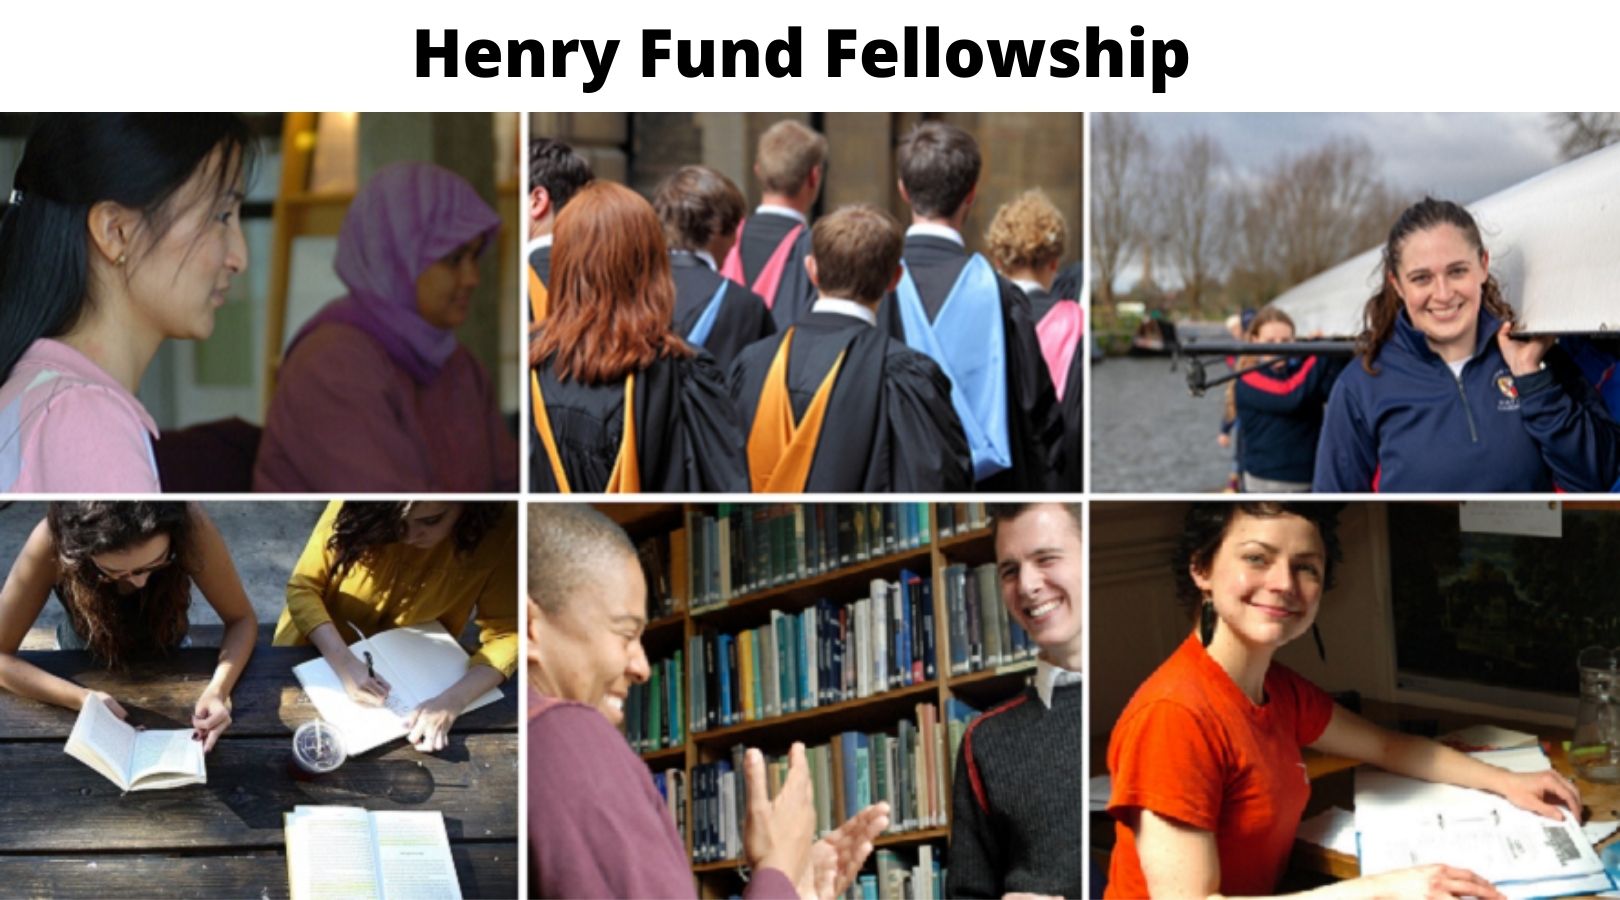 Henry Fund 2022 – Fully funded Fellowship for Postgraduate Study at Harvard or Yale